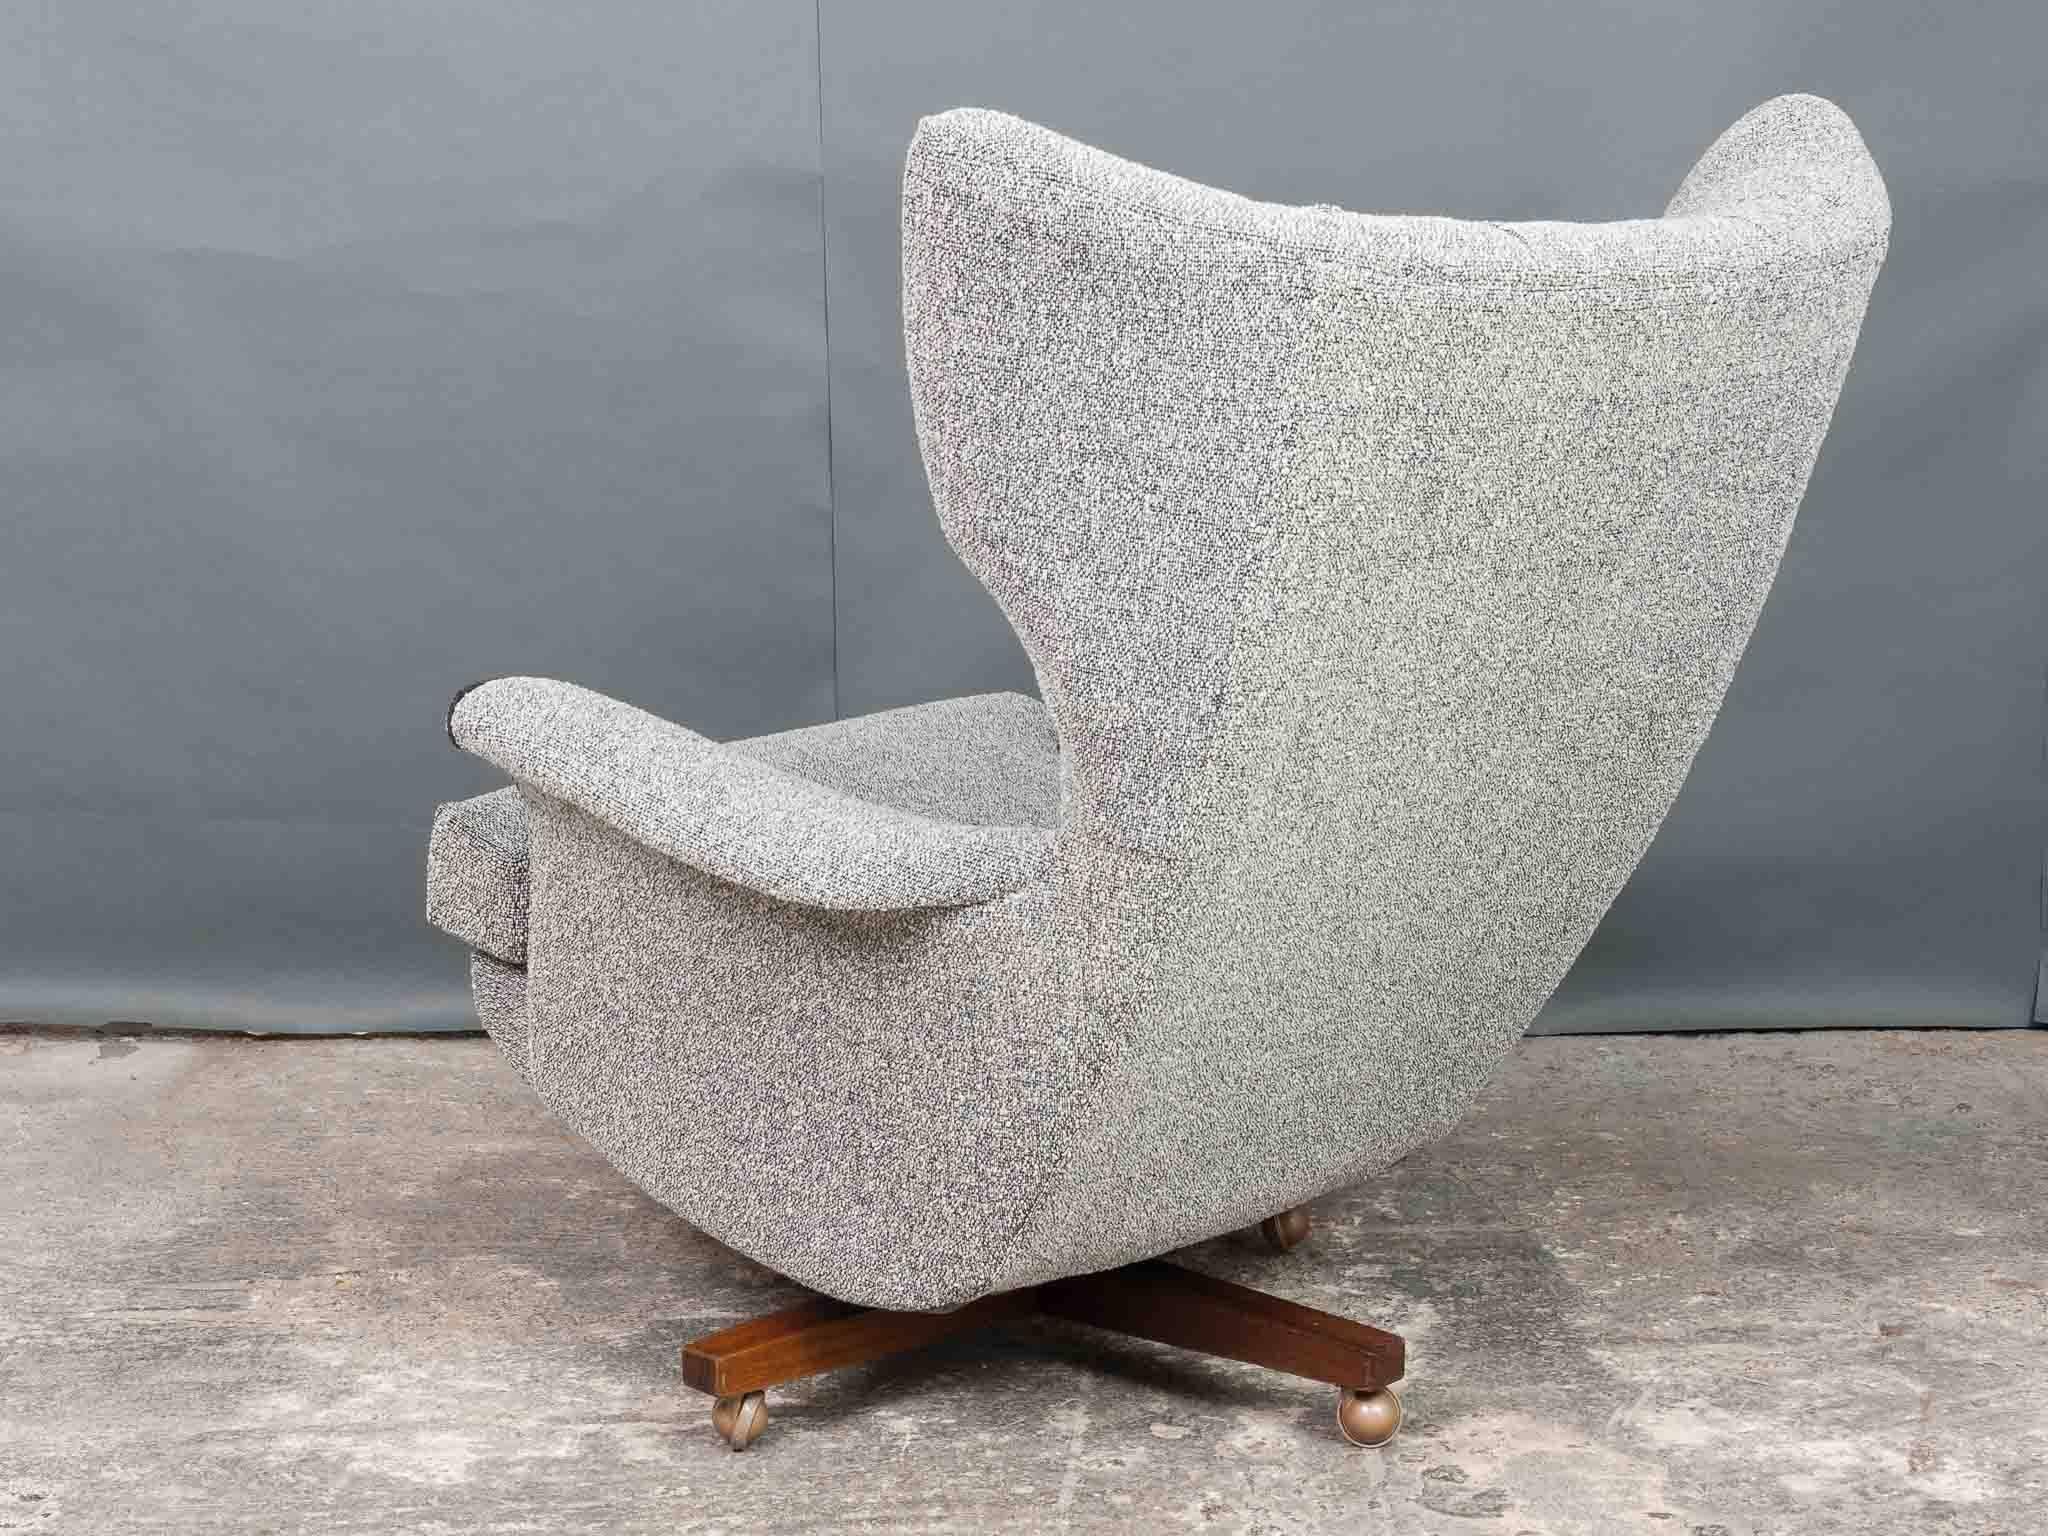 1960s G Plan furniture iconic swivel chair and known as ‘The most comfortable chair in the world’ model No. 6250 designed by Paul Conti. A stunning and very cool design Classic. Recently fully restored and reupholstered by renowned upholsterer